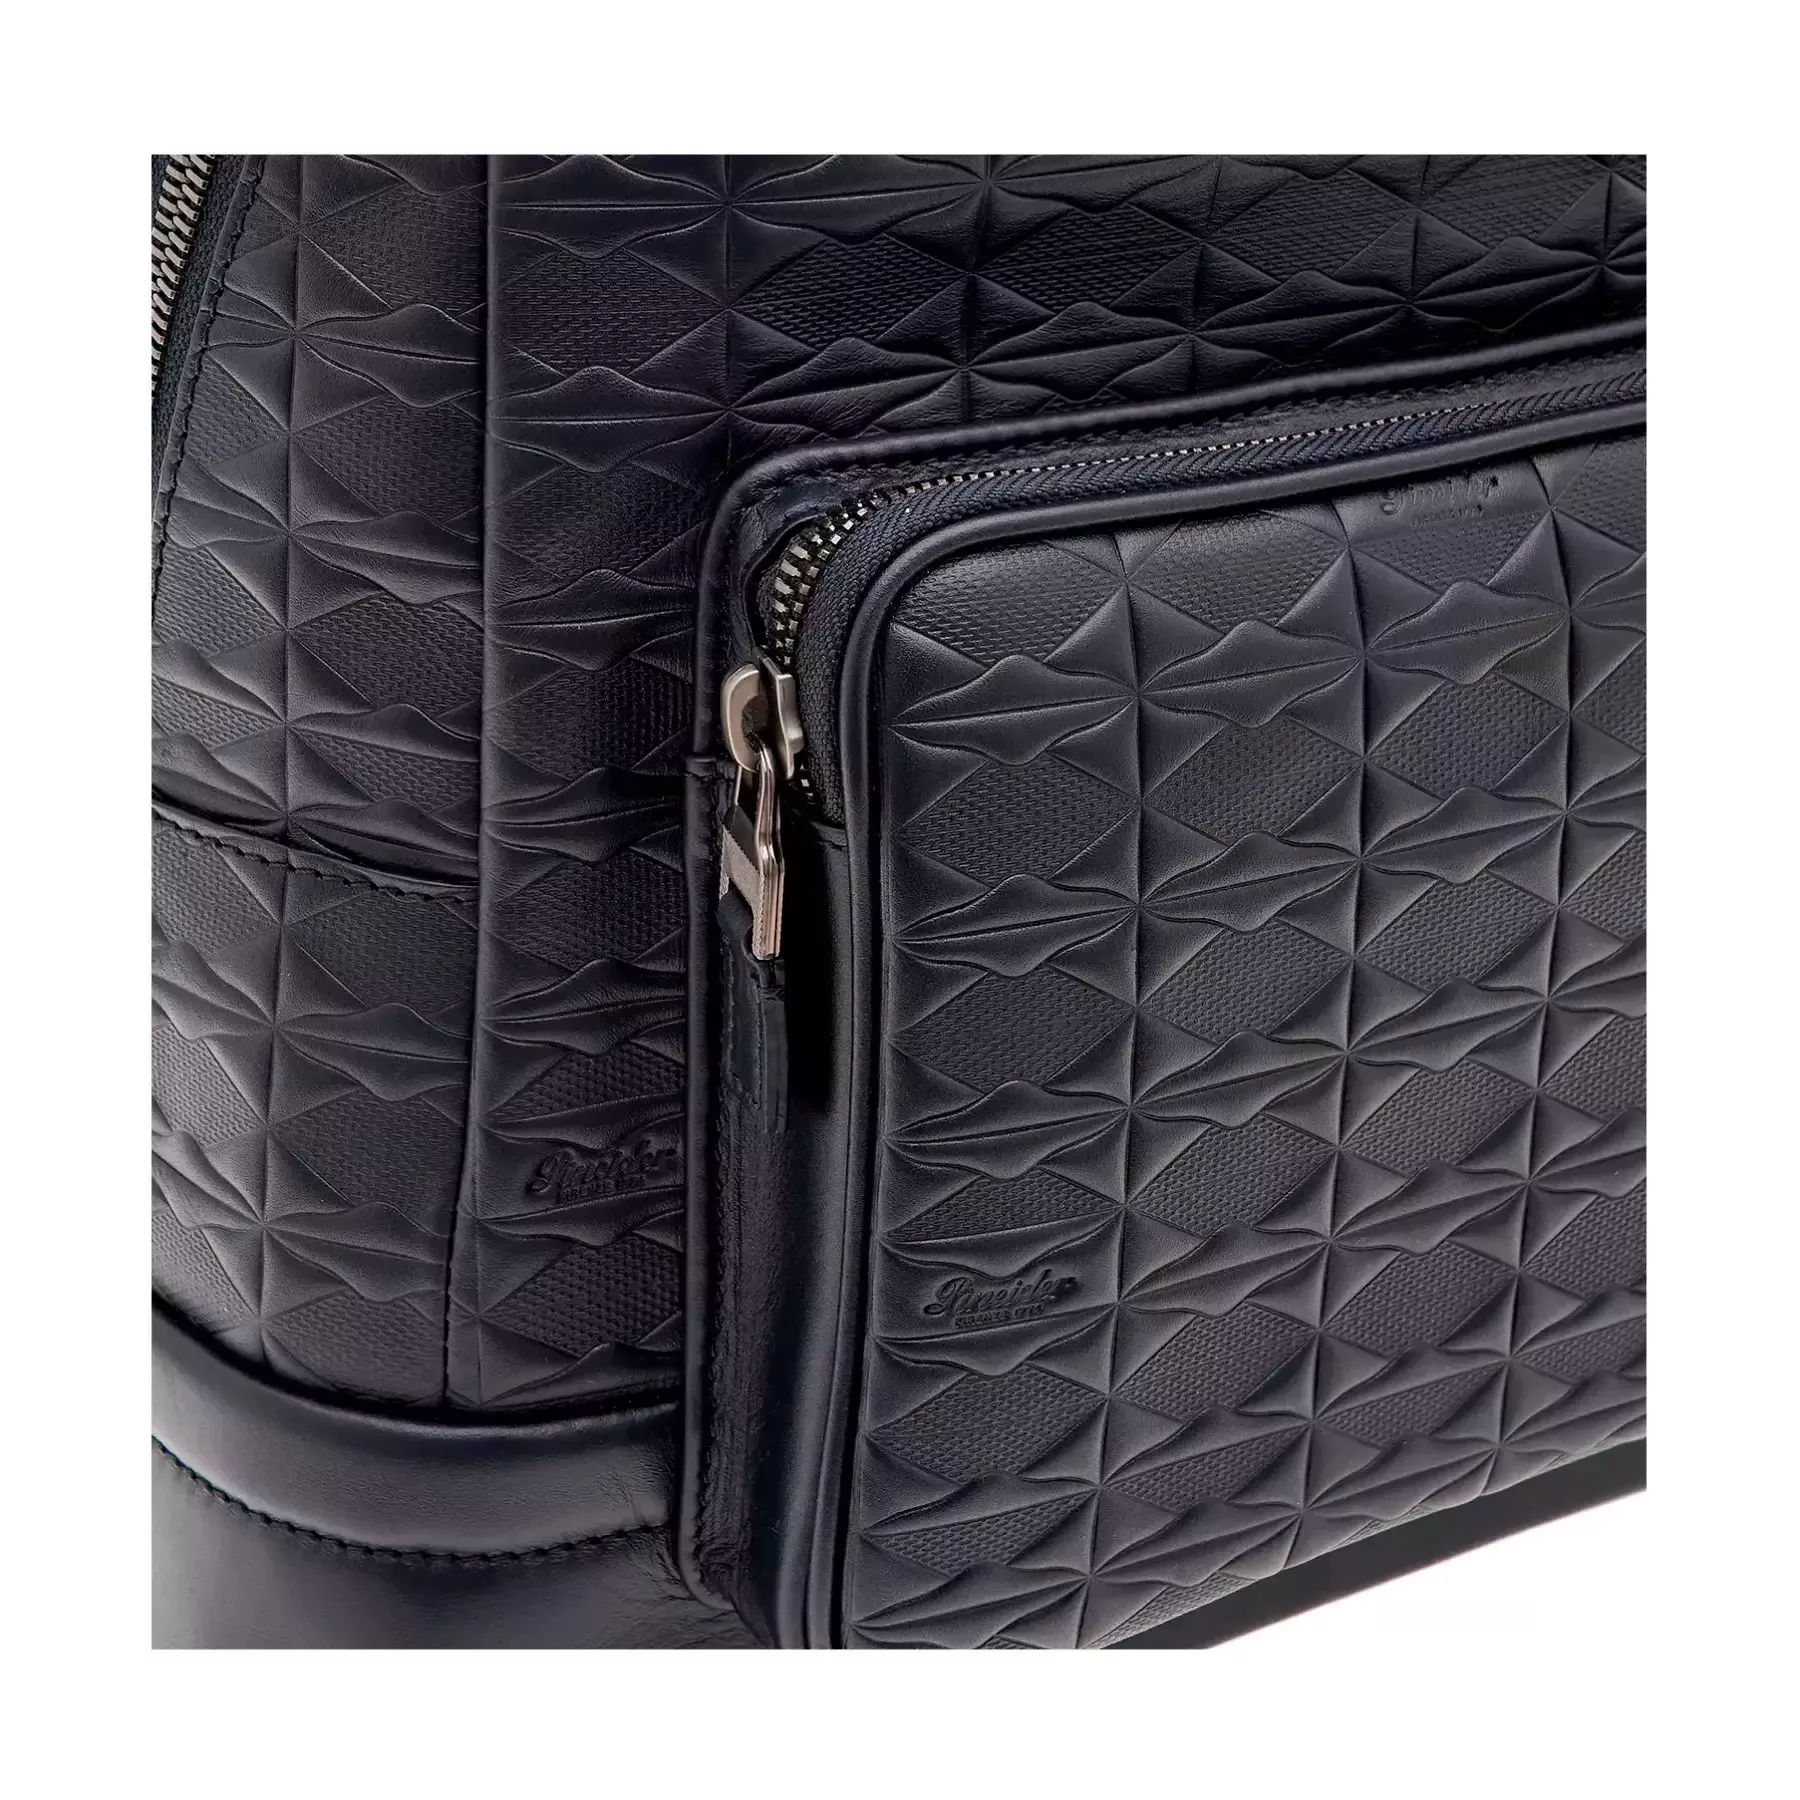 Embossed Empress Collection Business  Backpack